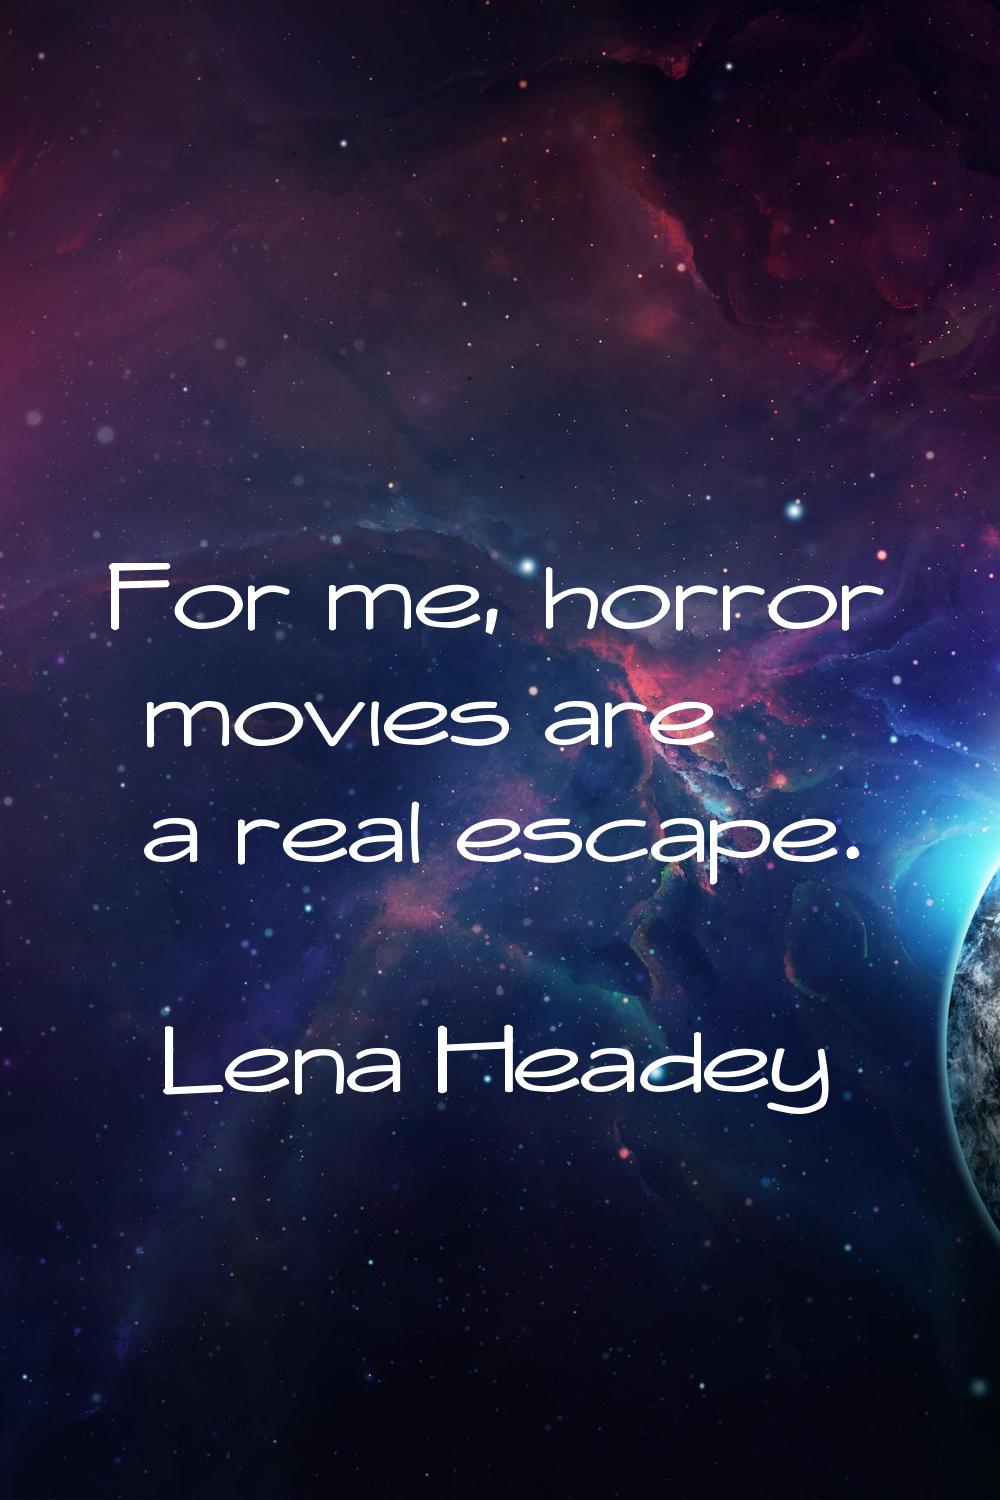 For me, horror movies are a real escape.